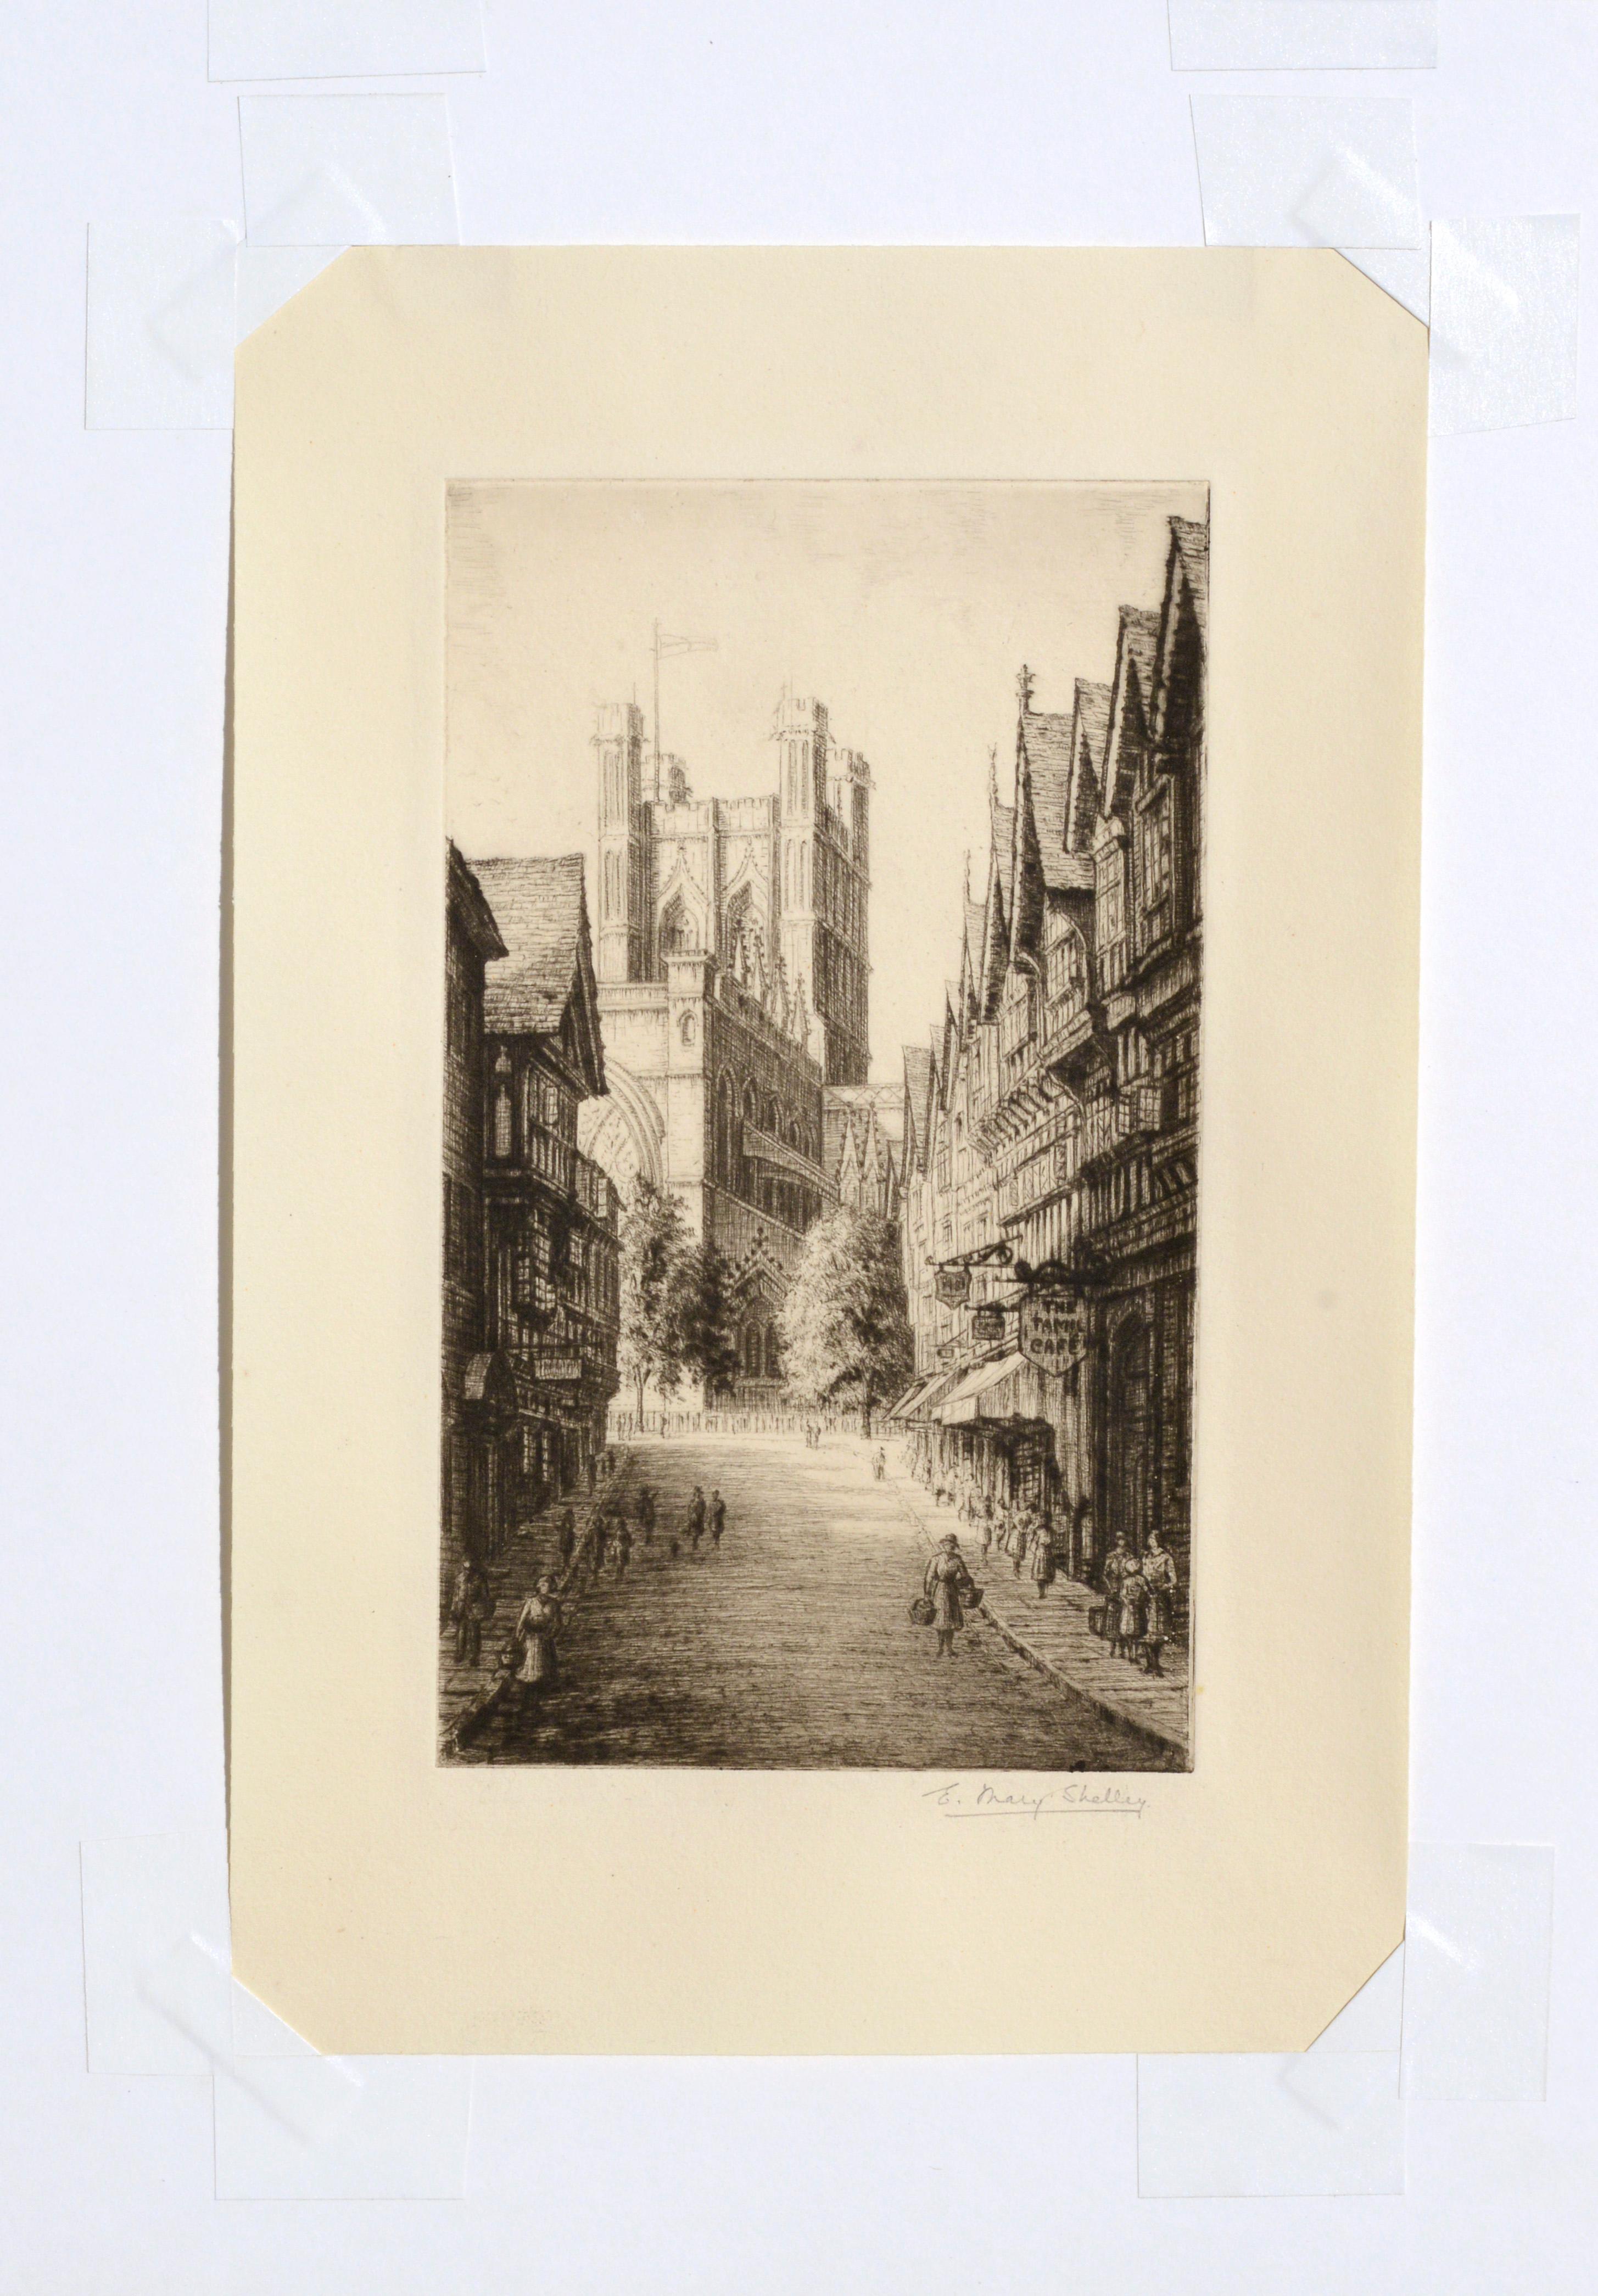 Early 20th Century British Street Scene - 1920s Figurative Landscape Etching - Impressionist Print by E. Mary Shelley